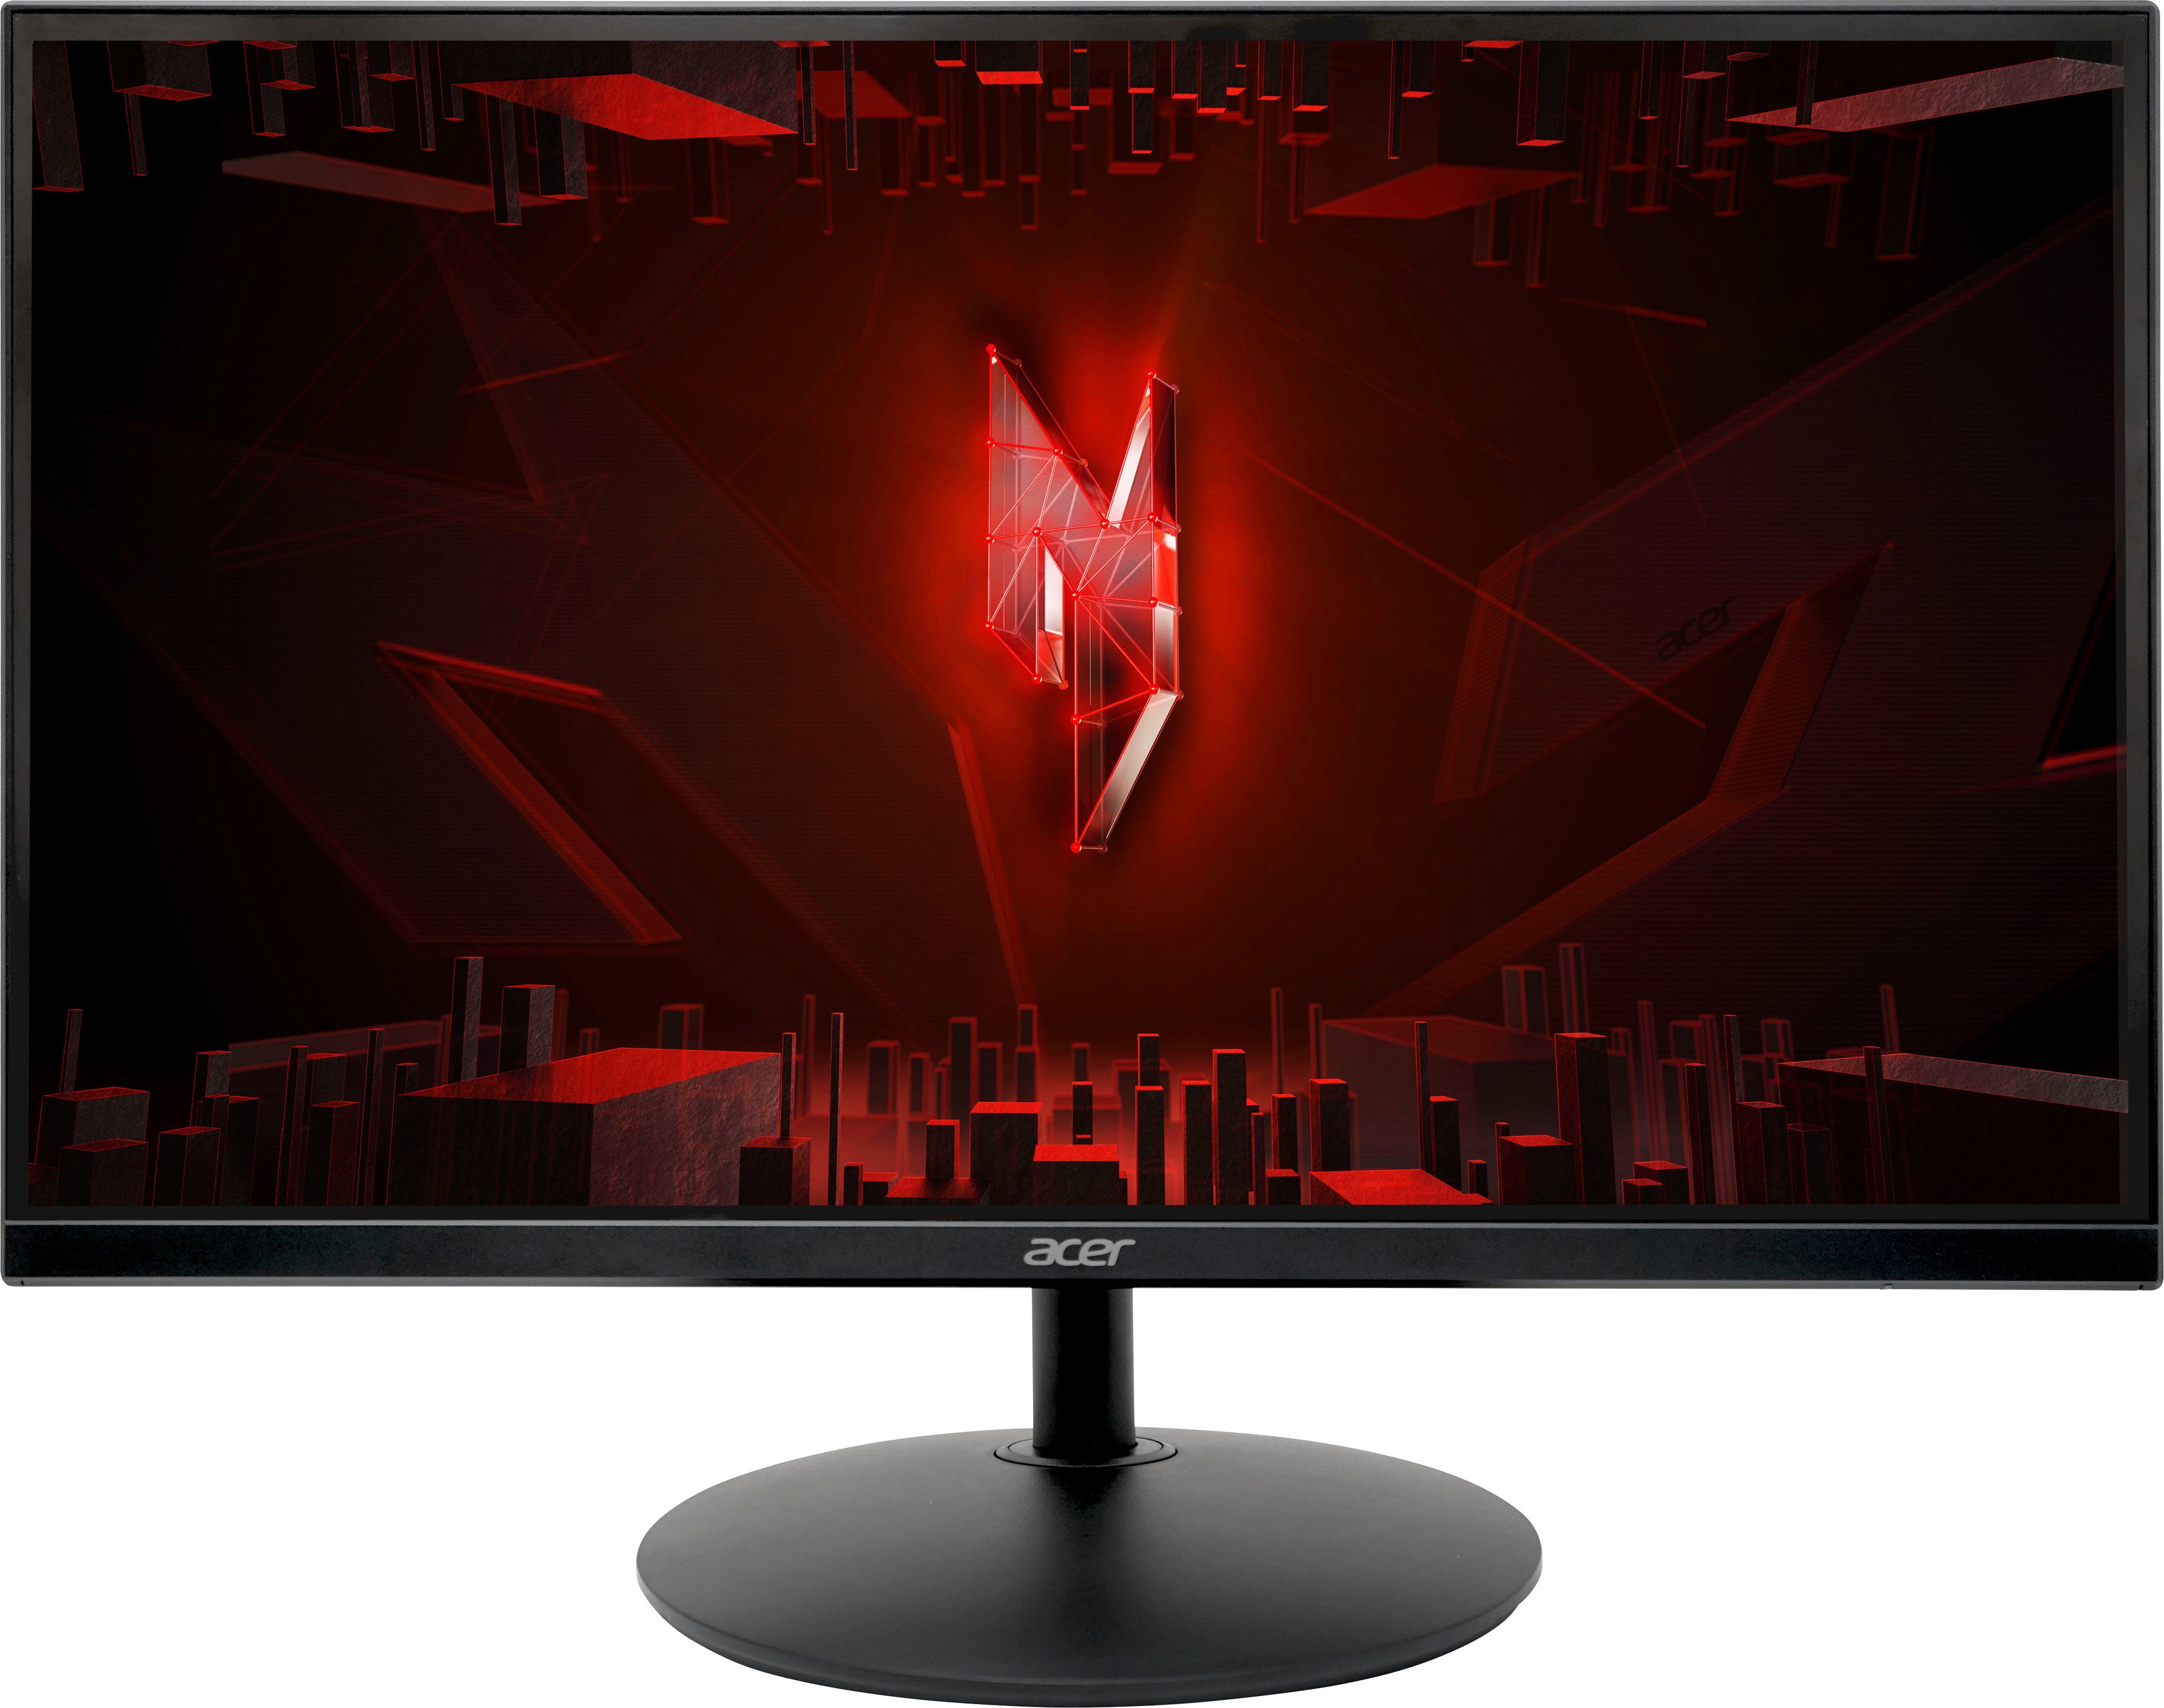 Curved Acer Gamingmonitore OTTO | online kaufen